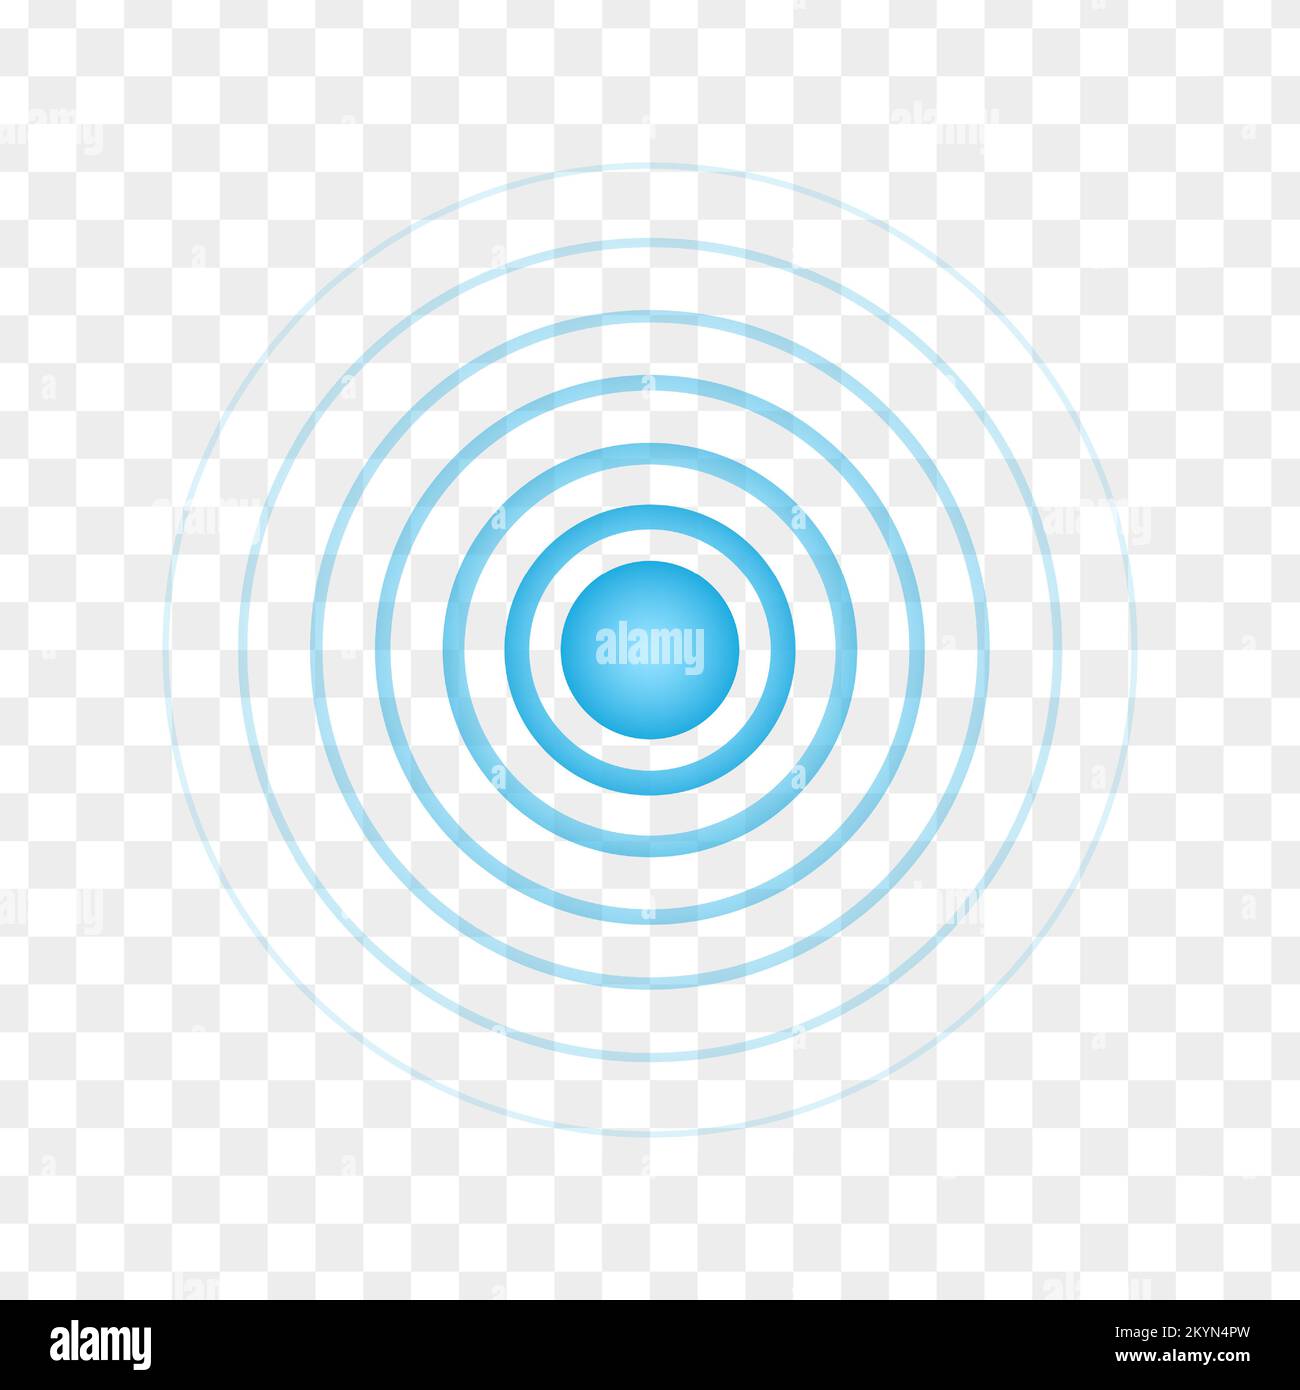 Blue point with concentric circles. Radar signal, sound or sonar wave sign on transparent background. Symbol of aim, target, healing, hurt, painkilling. Round localization icon. Vector illustration Stock Vector